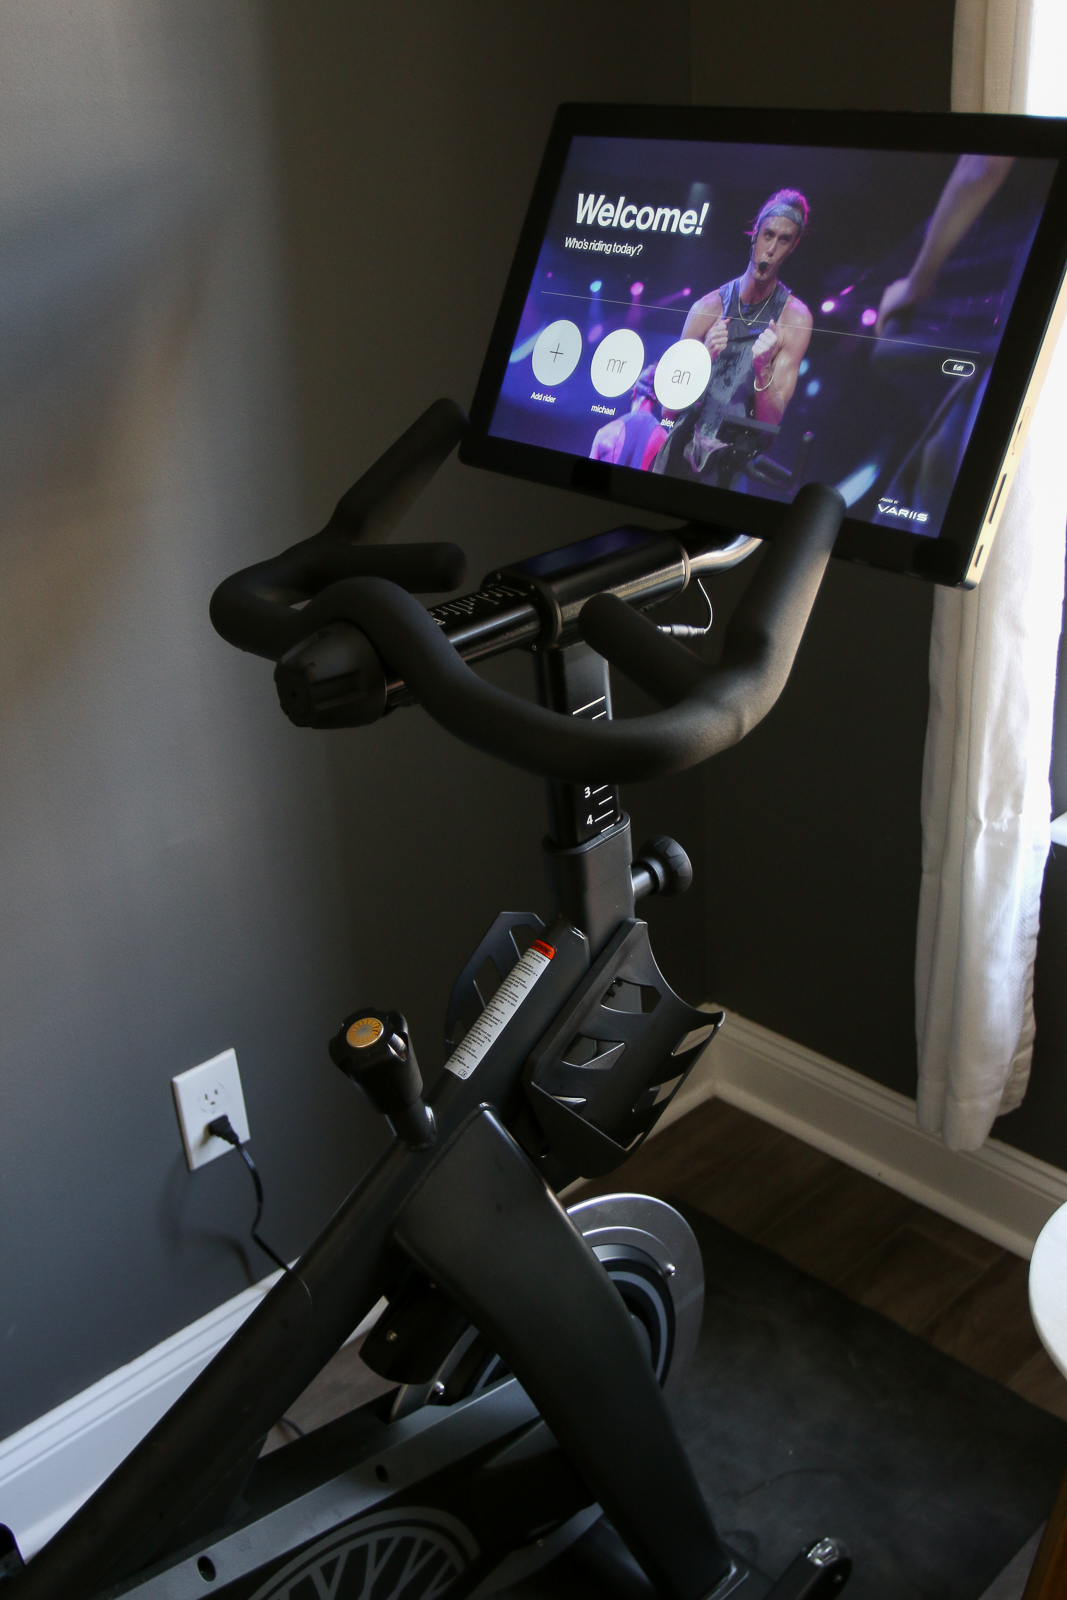 peloton class most like soulcycle